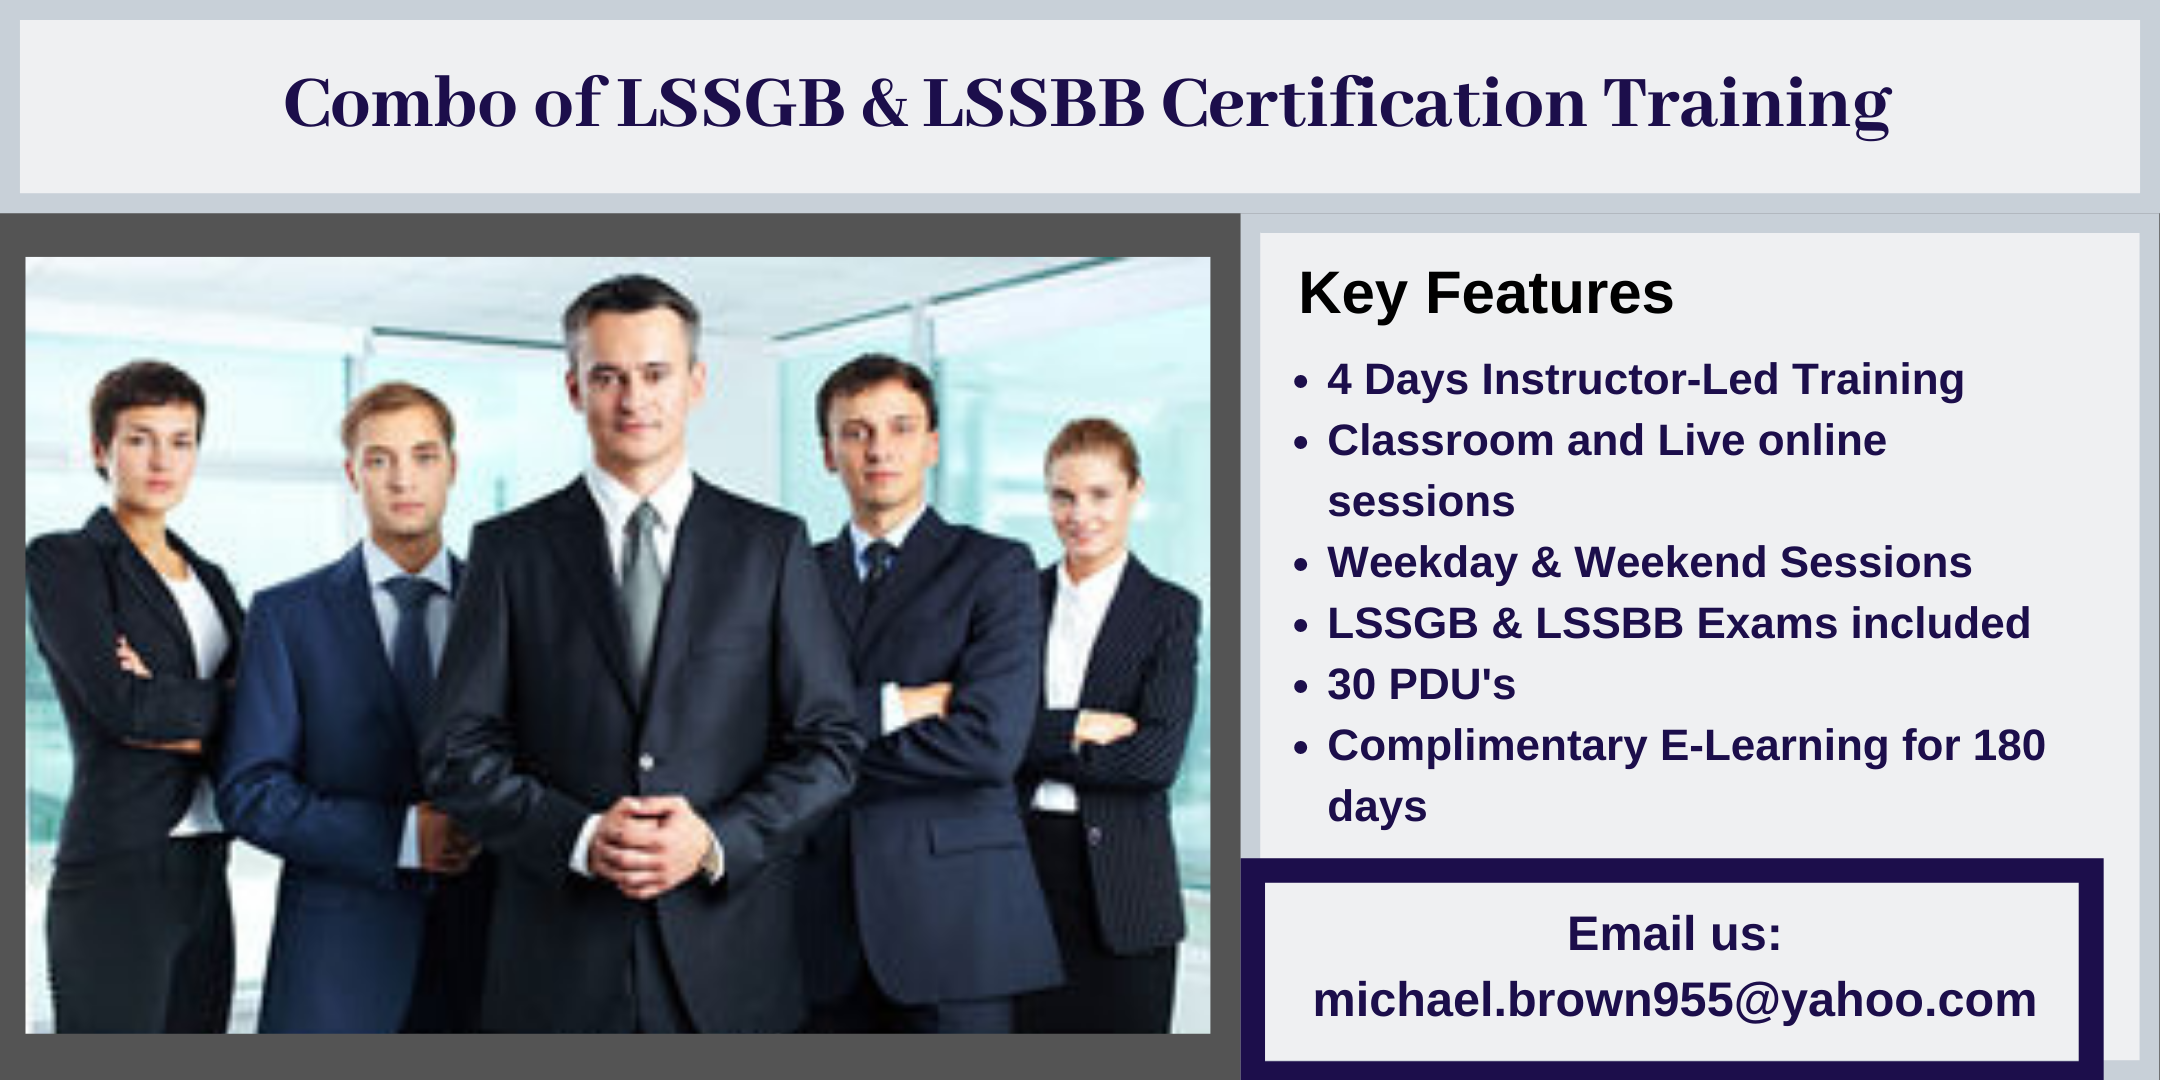 Combo of LSSGB & LSSBB 4 days Certification Training in Highlands Ranch, CO